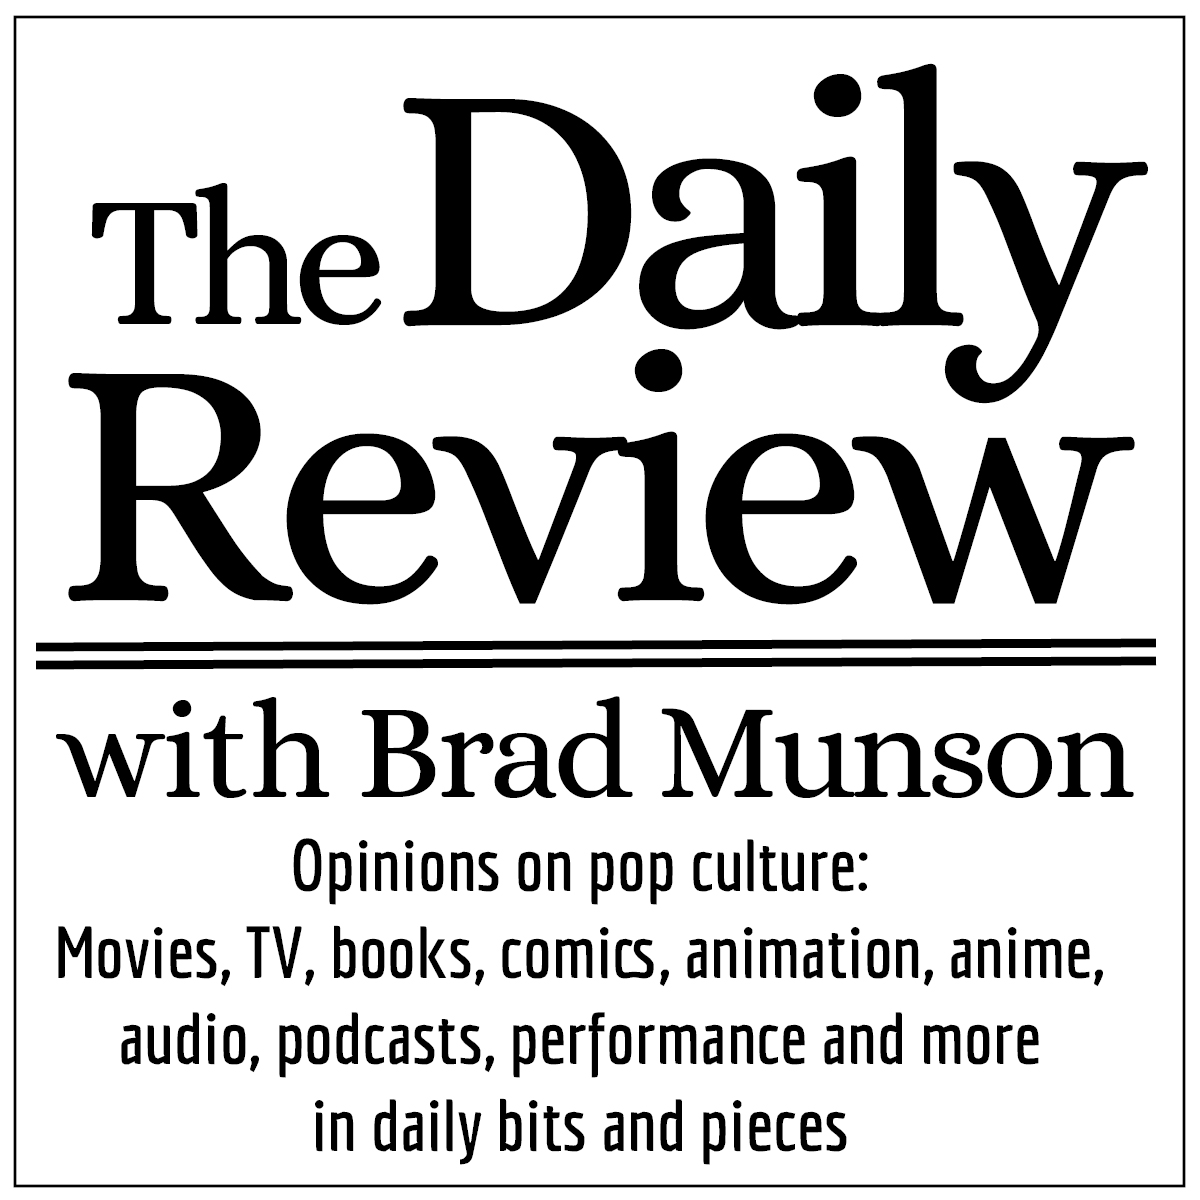 The Daily Review, BradMunson